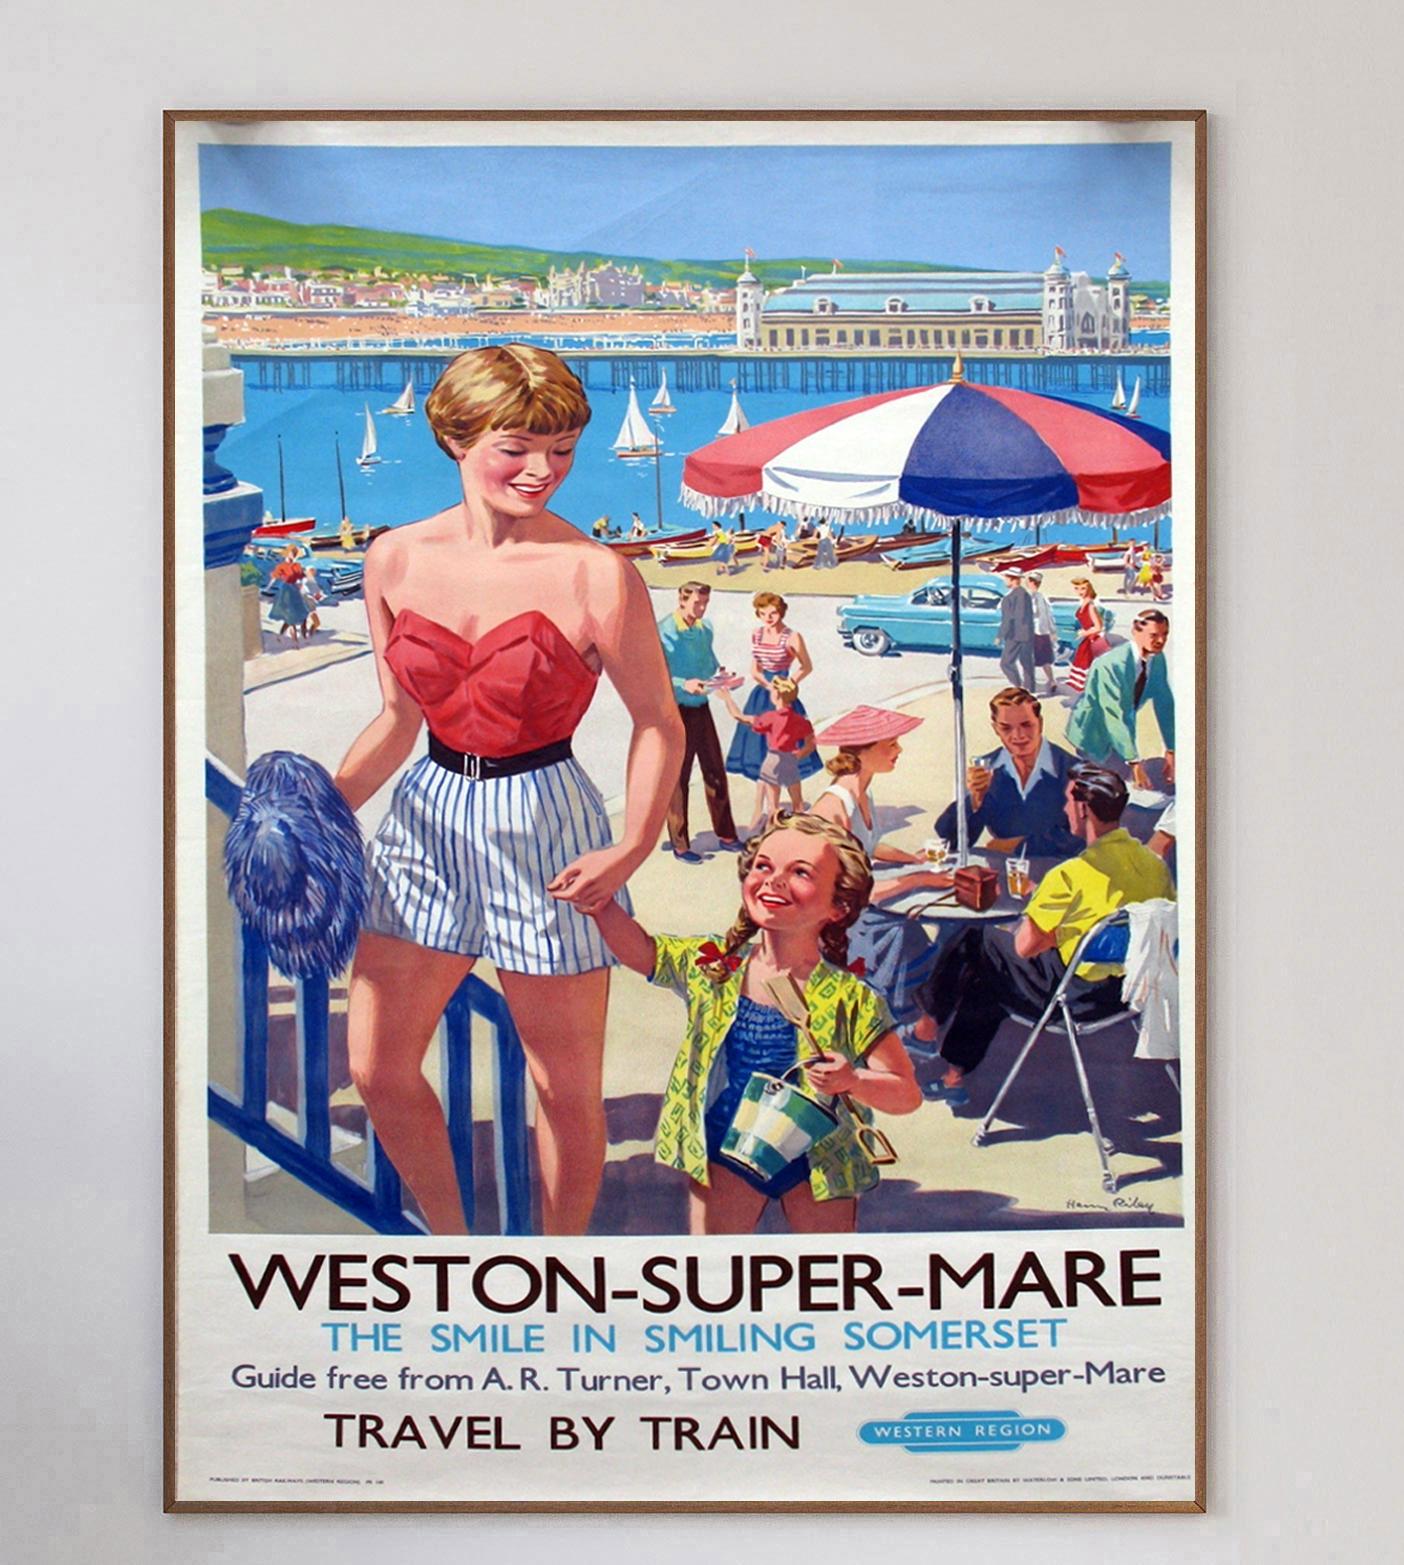 This stunning and rare poster for British Railways was created in 1960 to promote their routes to Weston-Super-Mare in Somerset, England. With artwork by Harry Arthur Riley (1895-1966) depicting a happy mother and daughter walking up from the Weston